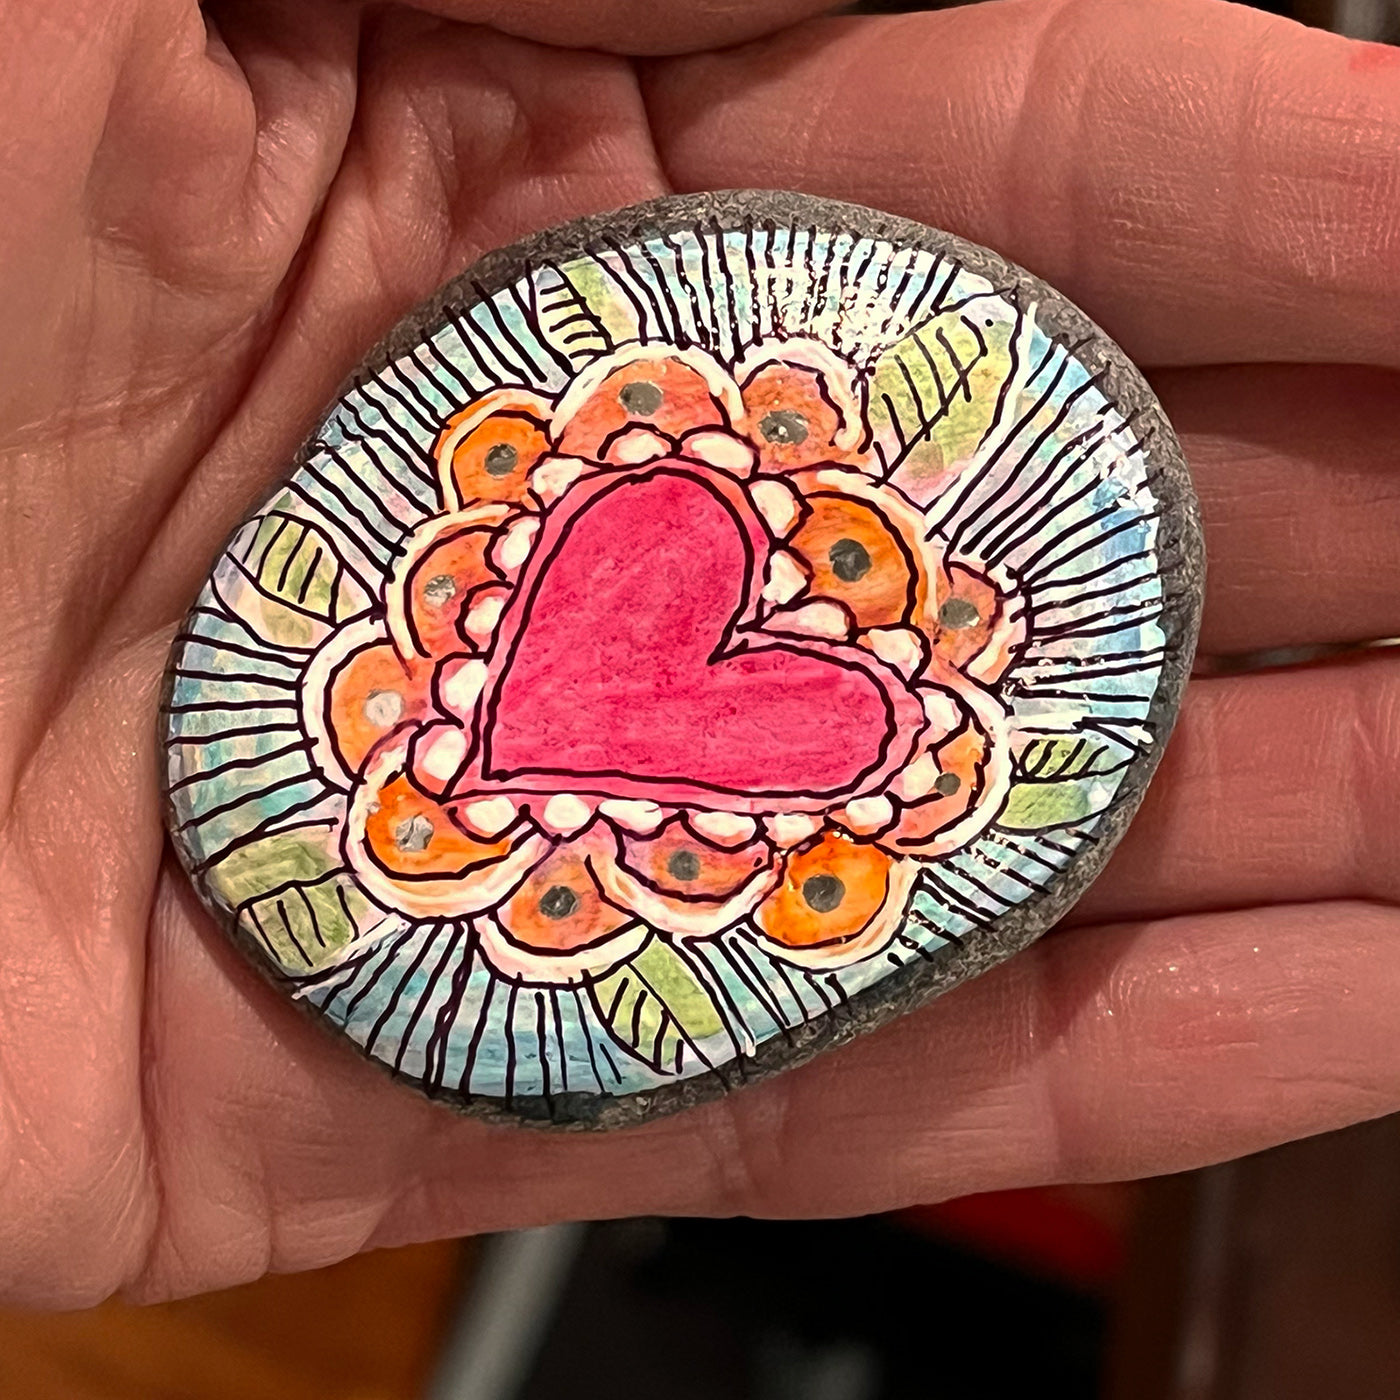 Hand painted stone - Heart flower leaf